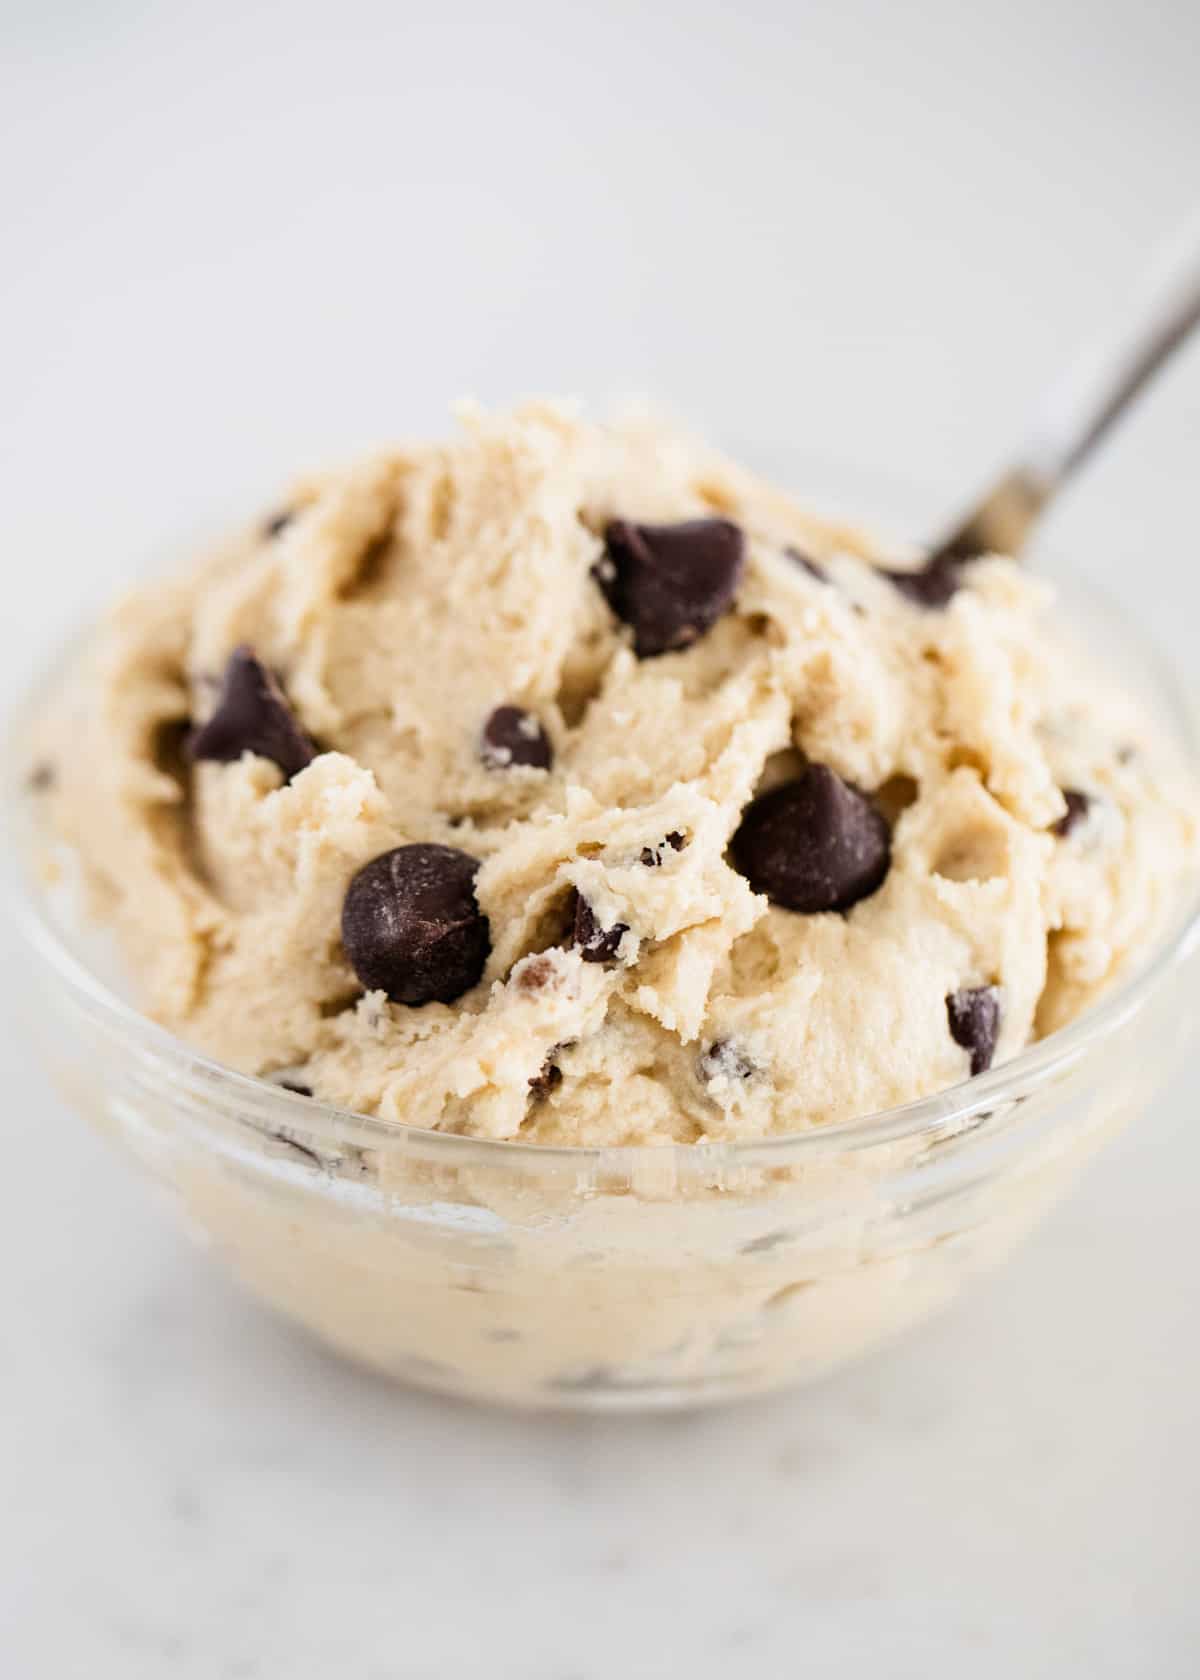 Edible cookie dough in a glass bowl.